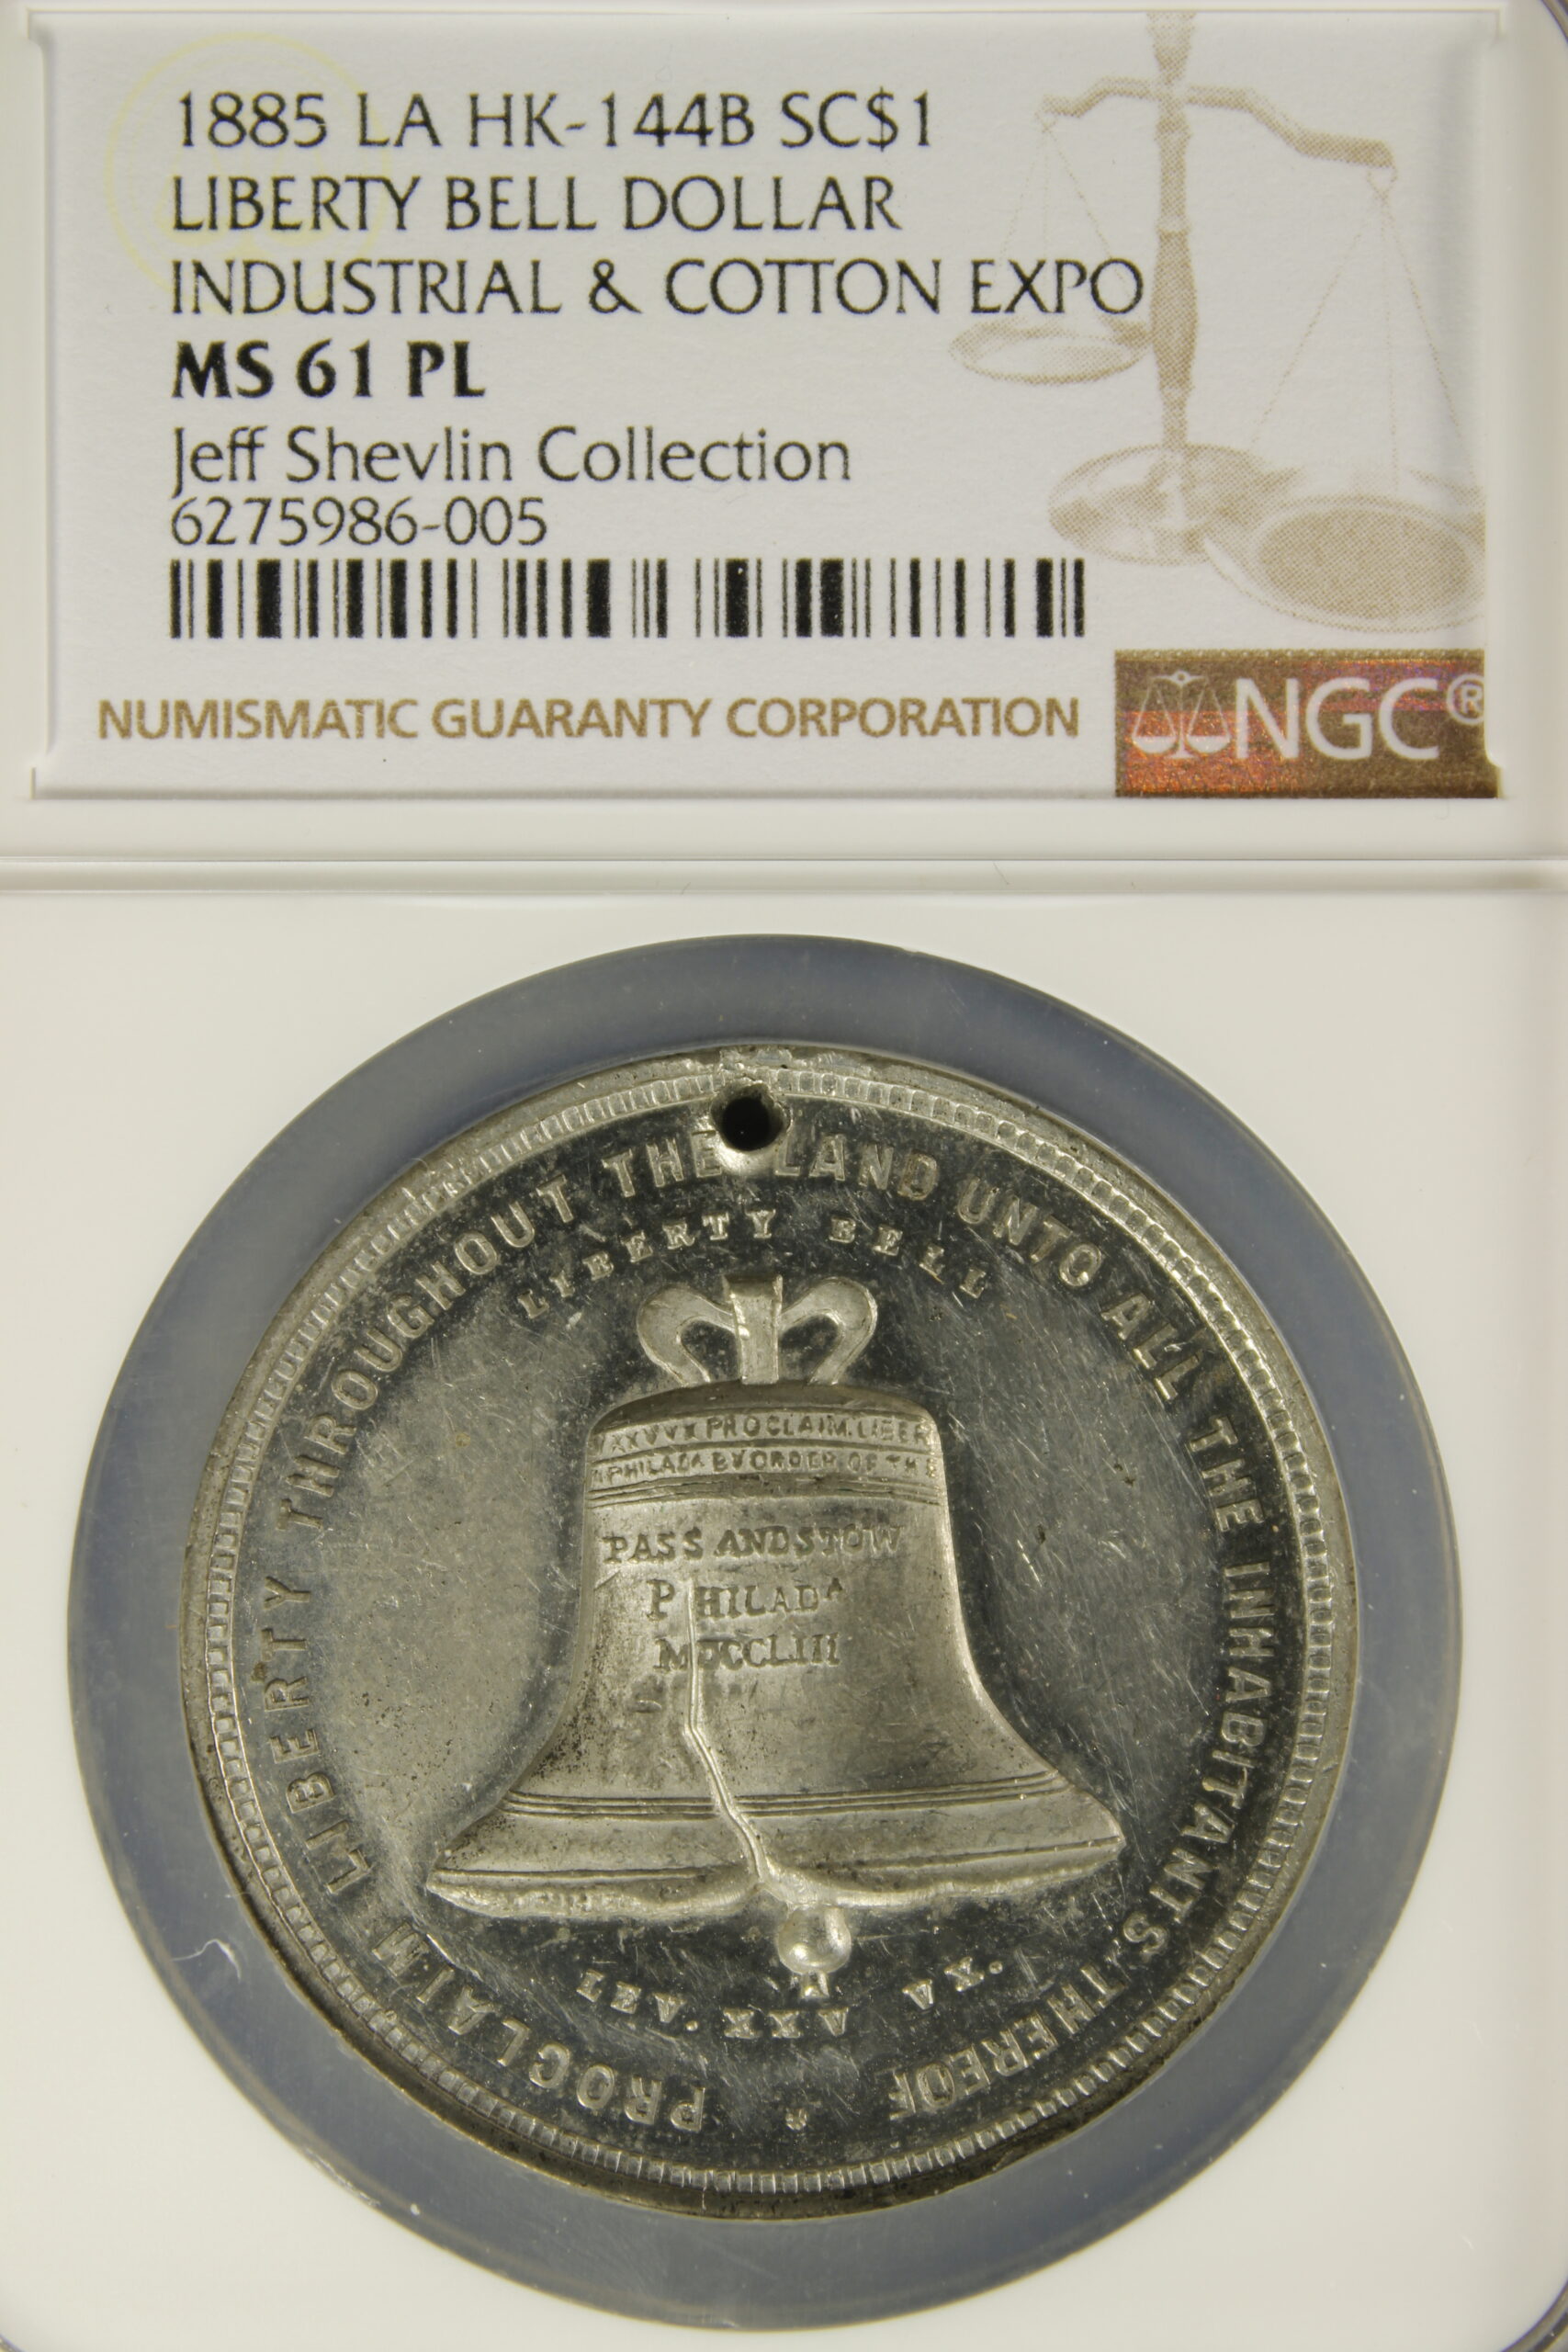 HK-144B 1885 Industrial Cotton Exposition Liberty Bell Loaned SCD